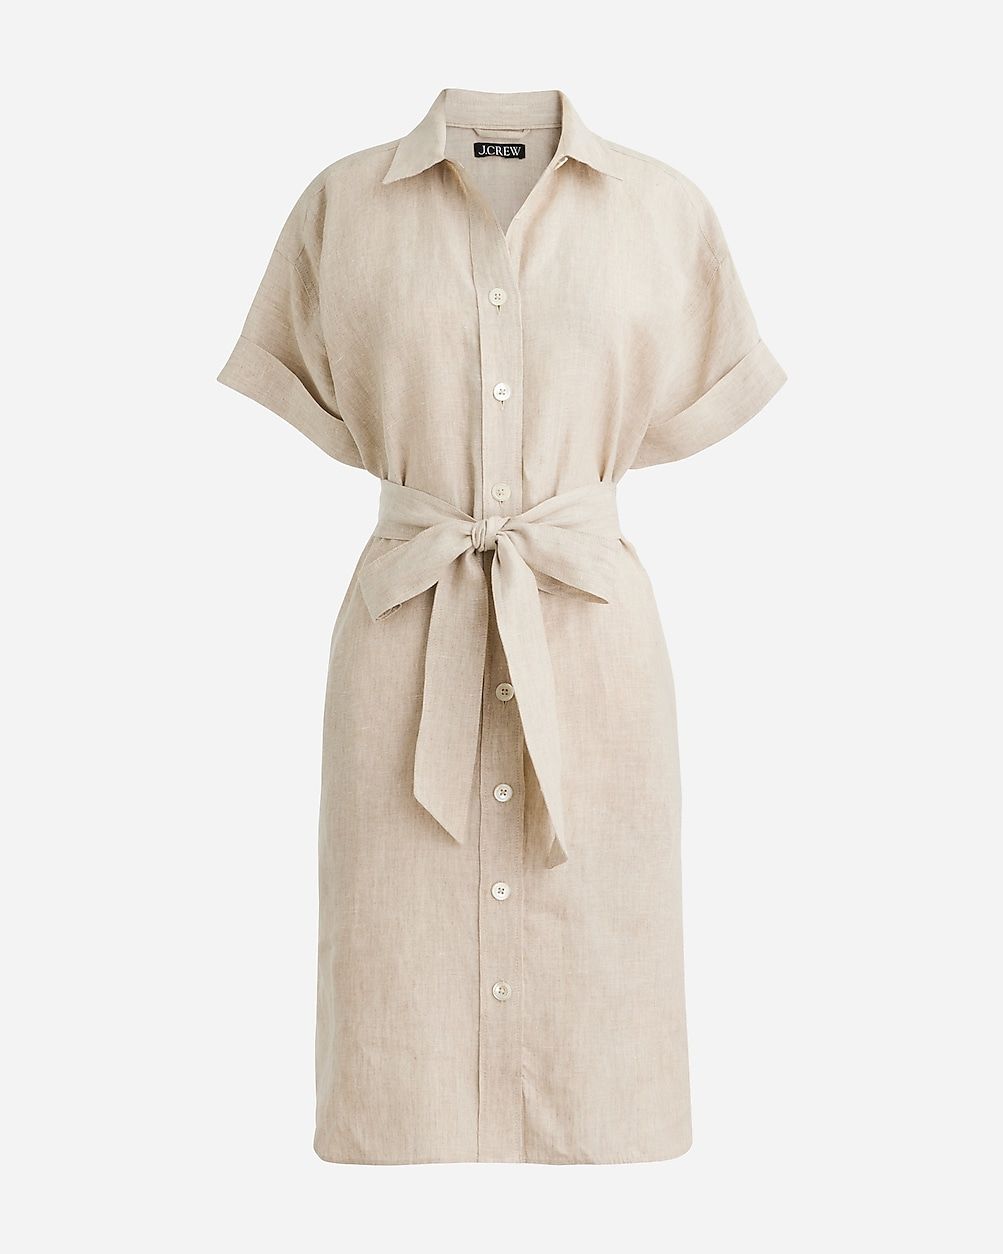 Tall capitaine shirtdress in linen | J.Crew US